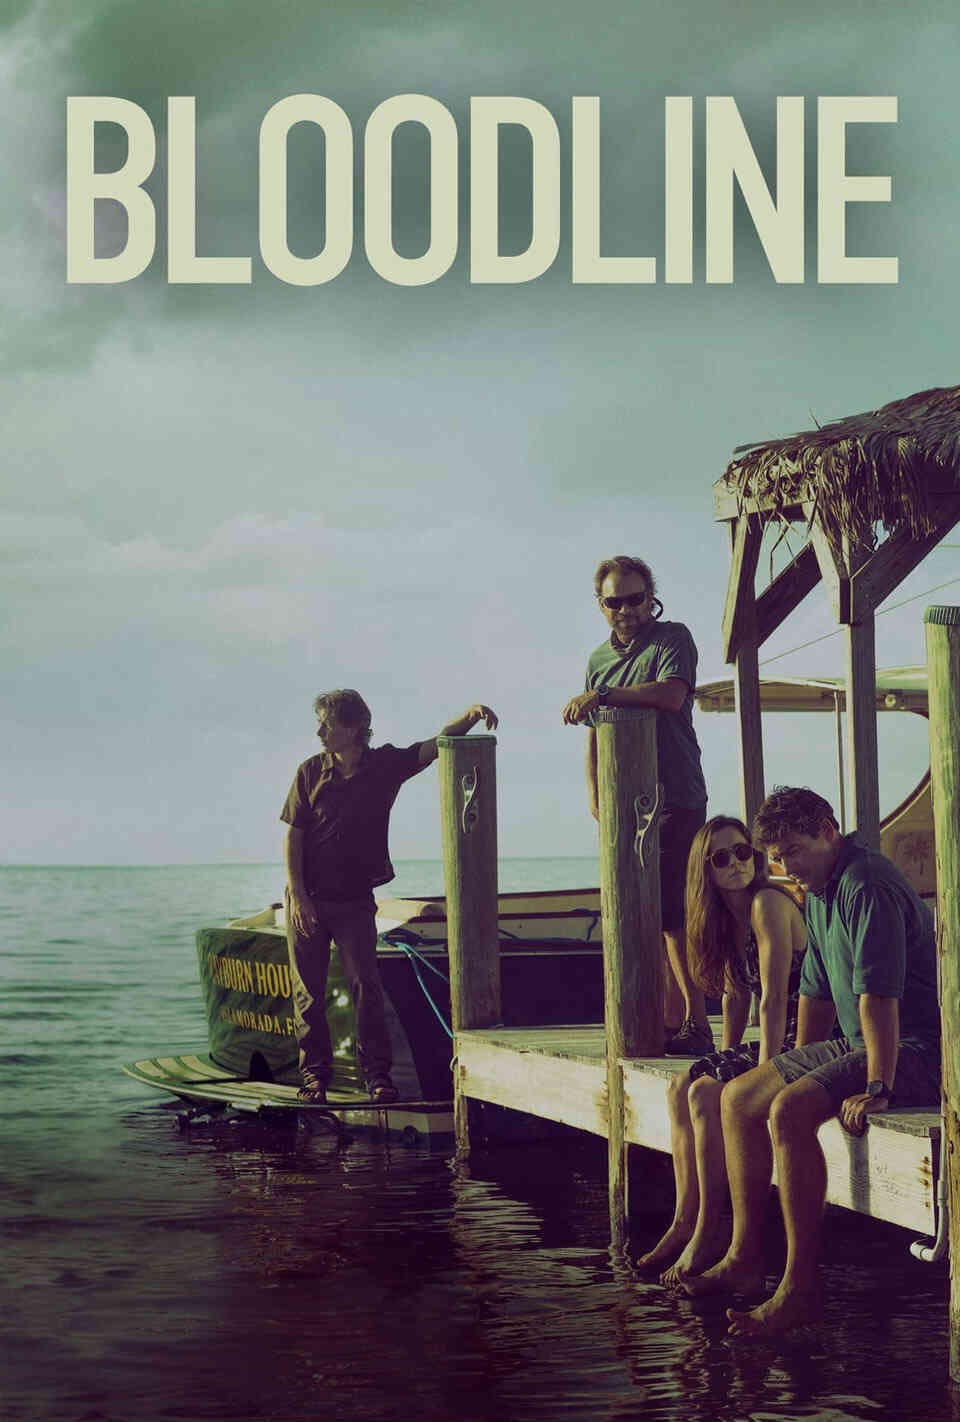 Read Bloodline screenplay (poster)